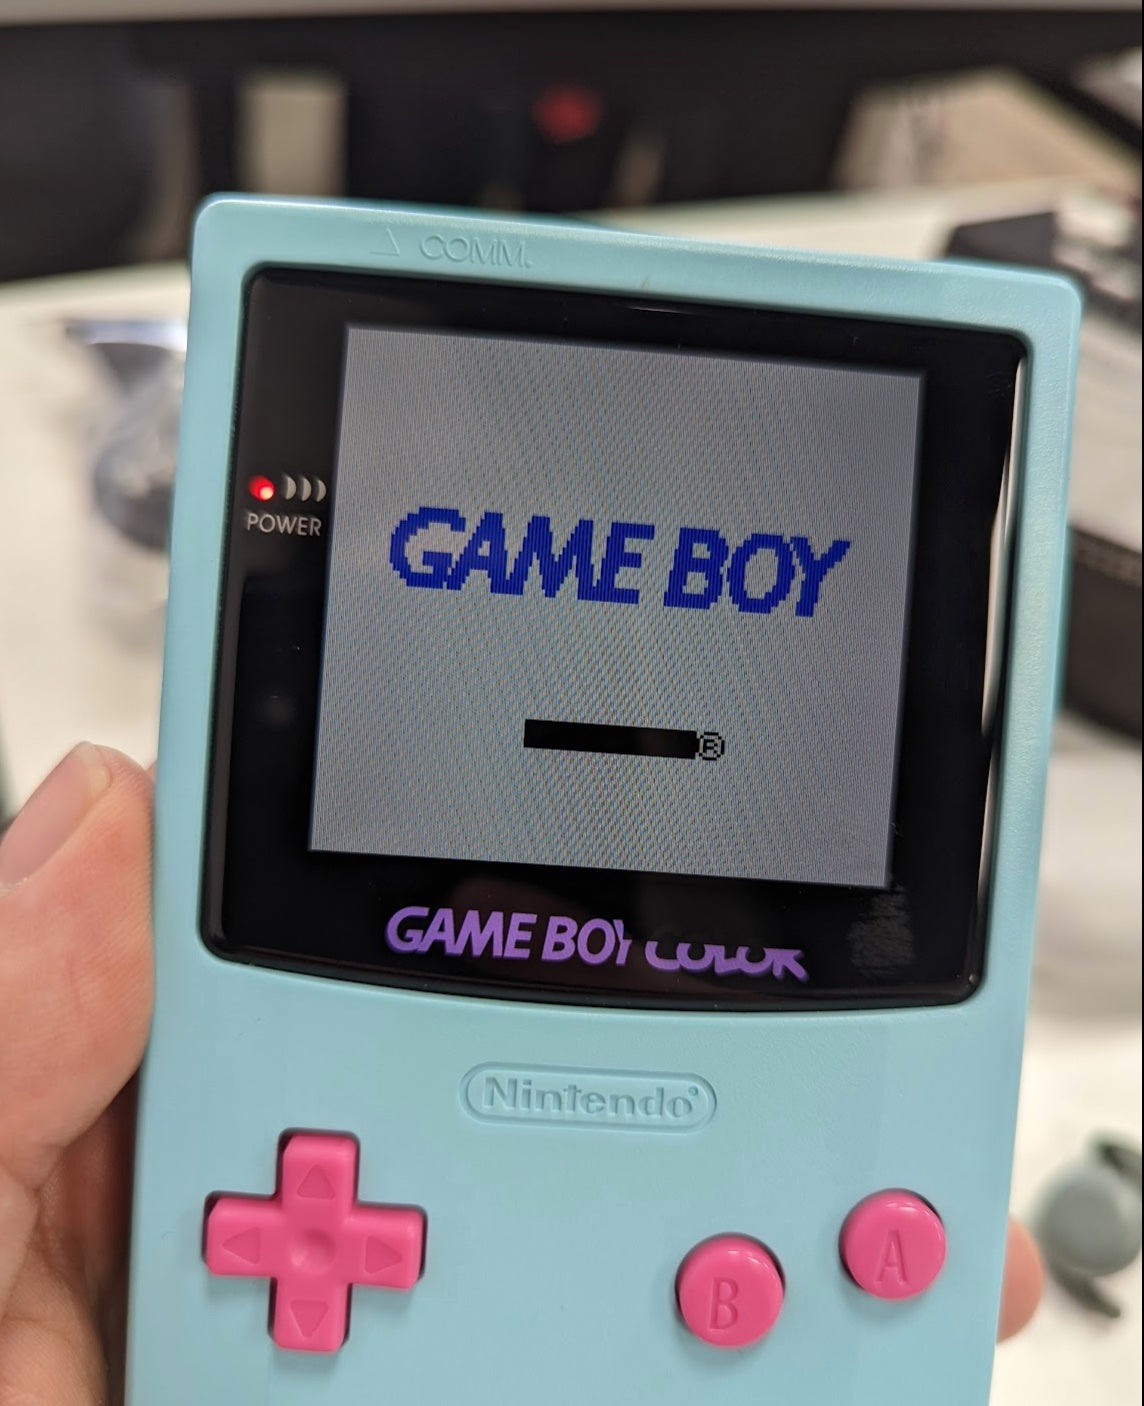 Funny Playing IPS game boy color logo problem : r/Gameboy